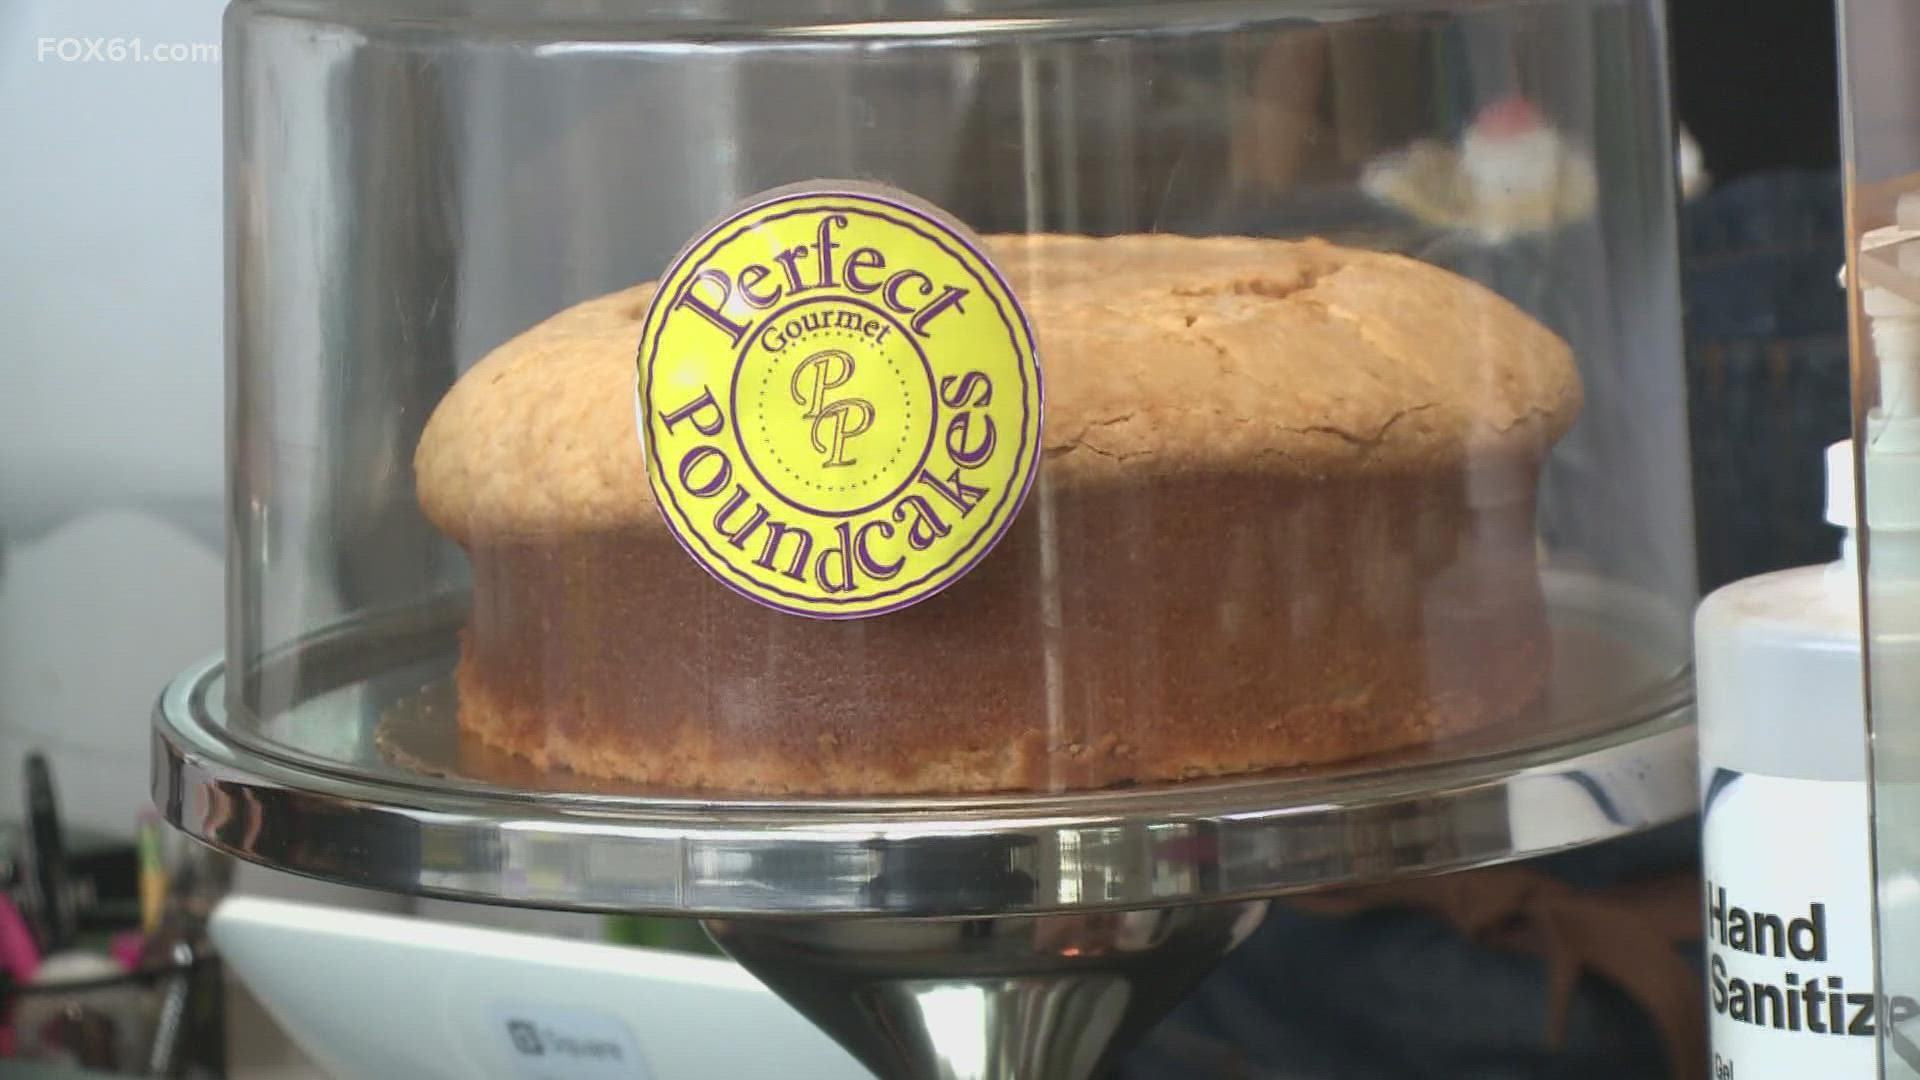 Perfect Poundcake, in East Hartford is rolling up their sleeves to whip up dozens of their famous “pound cups”